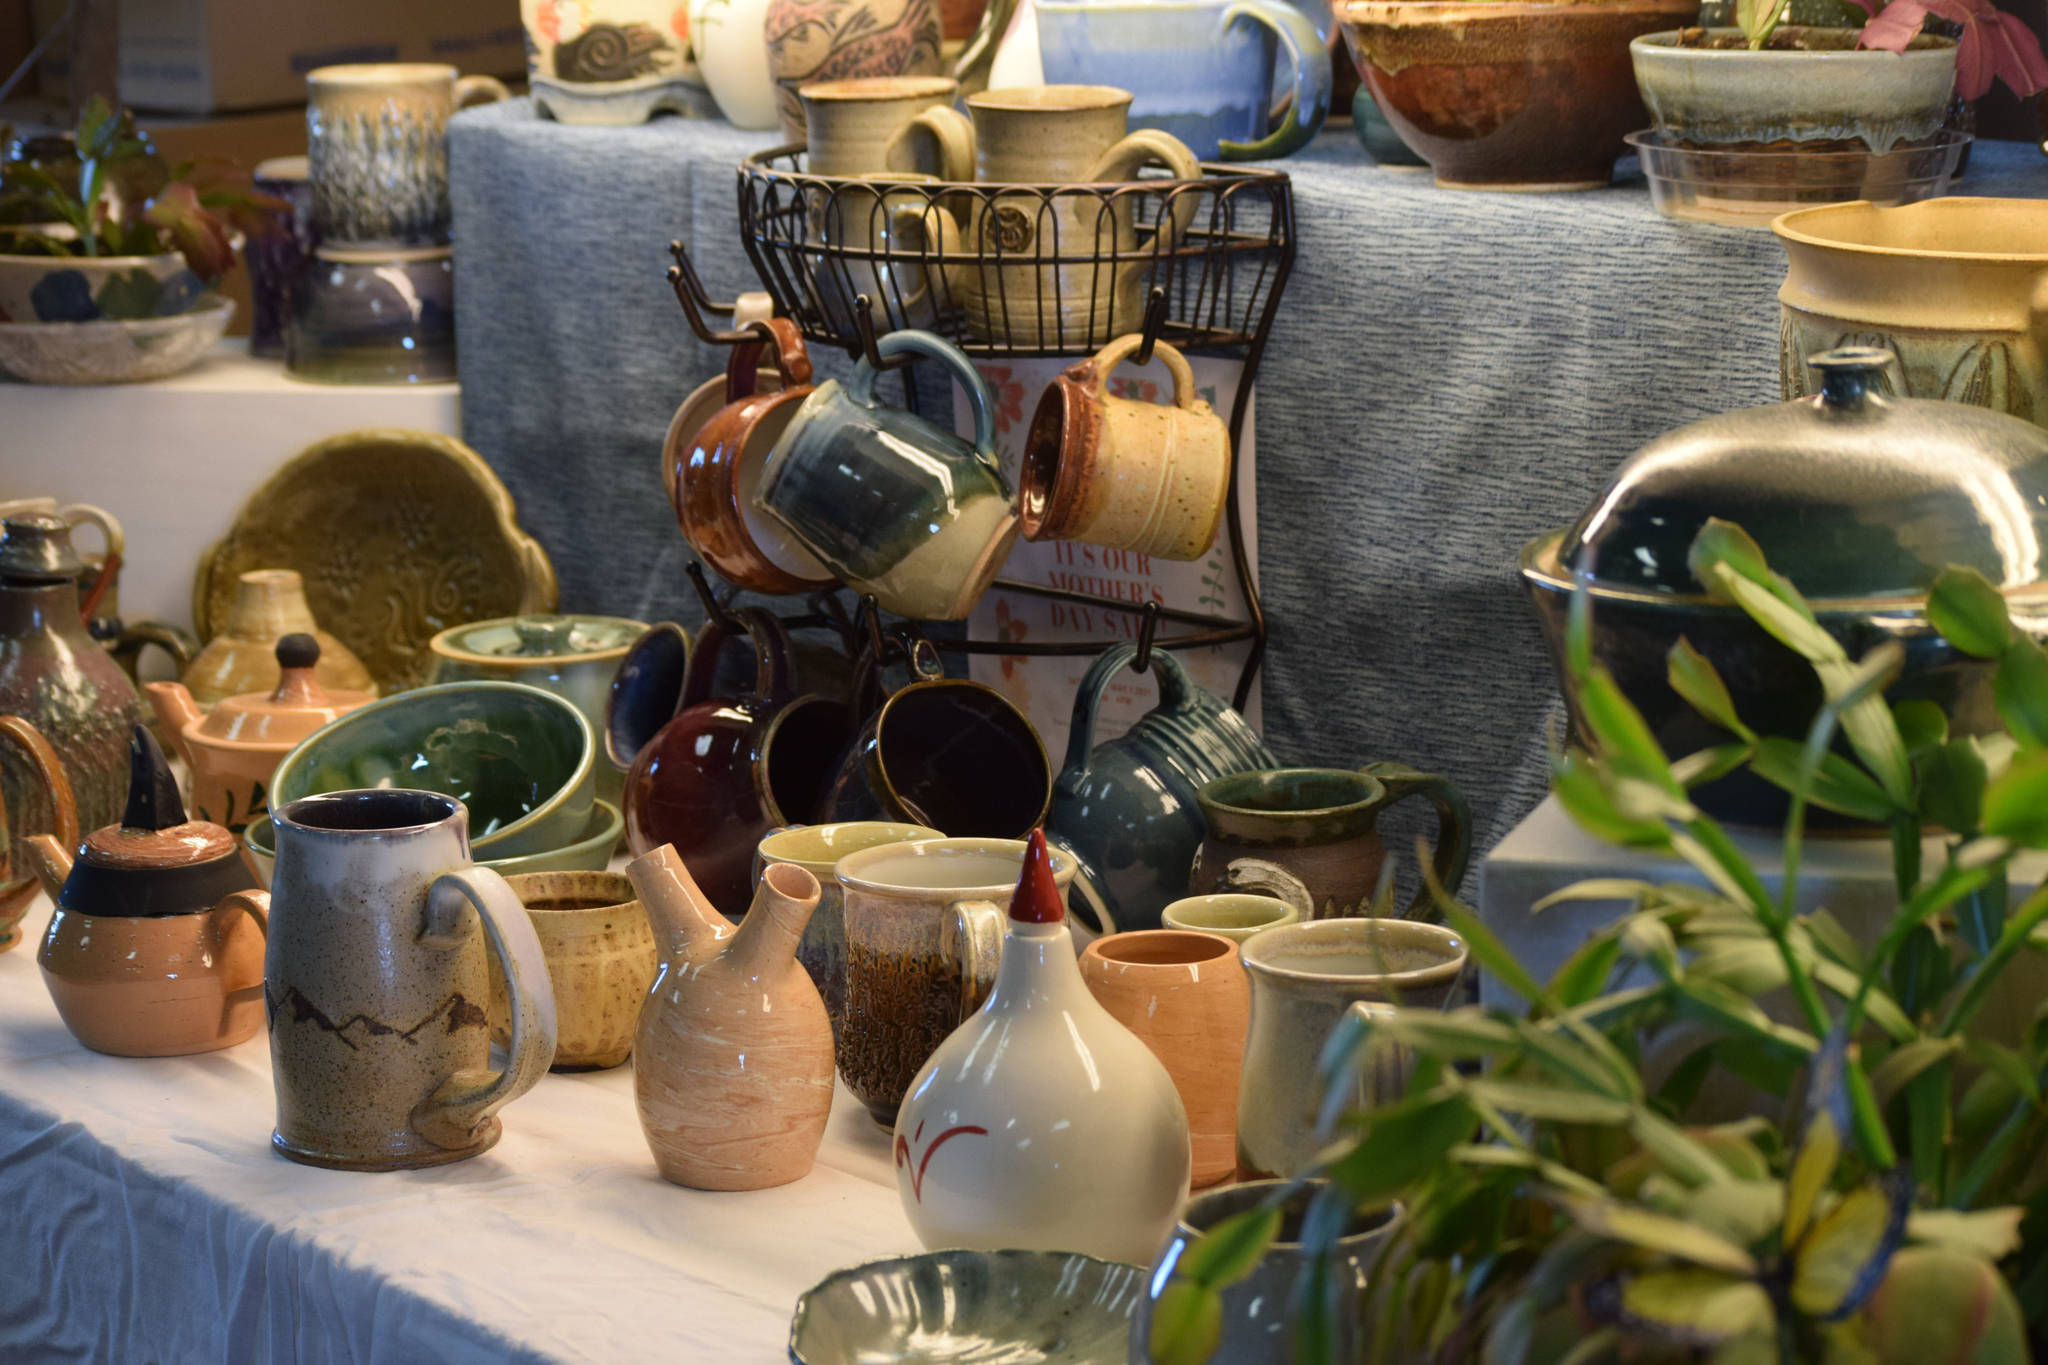 Handmade ceramics are on display at the Kenai Potters Guild on Tuesday, April 27, 2021. Camille Botello / Peninsula Clarion